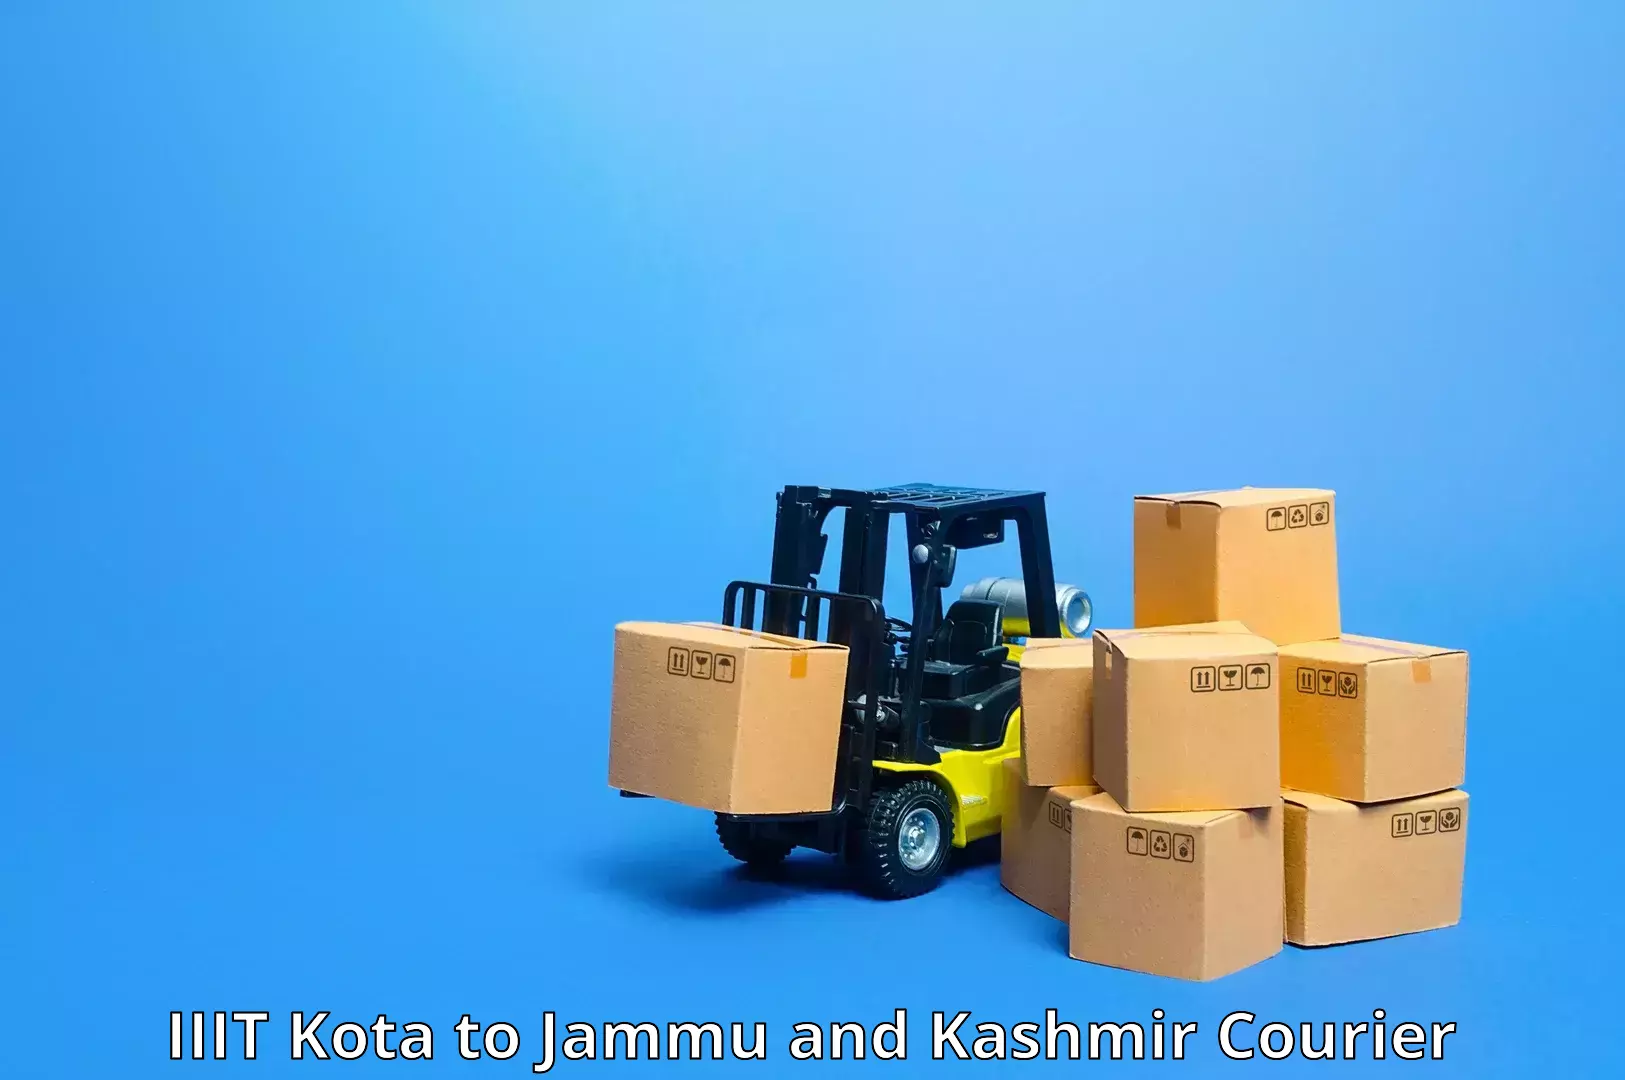 State-of-the-art courier technology IIIT Kota to Bohri